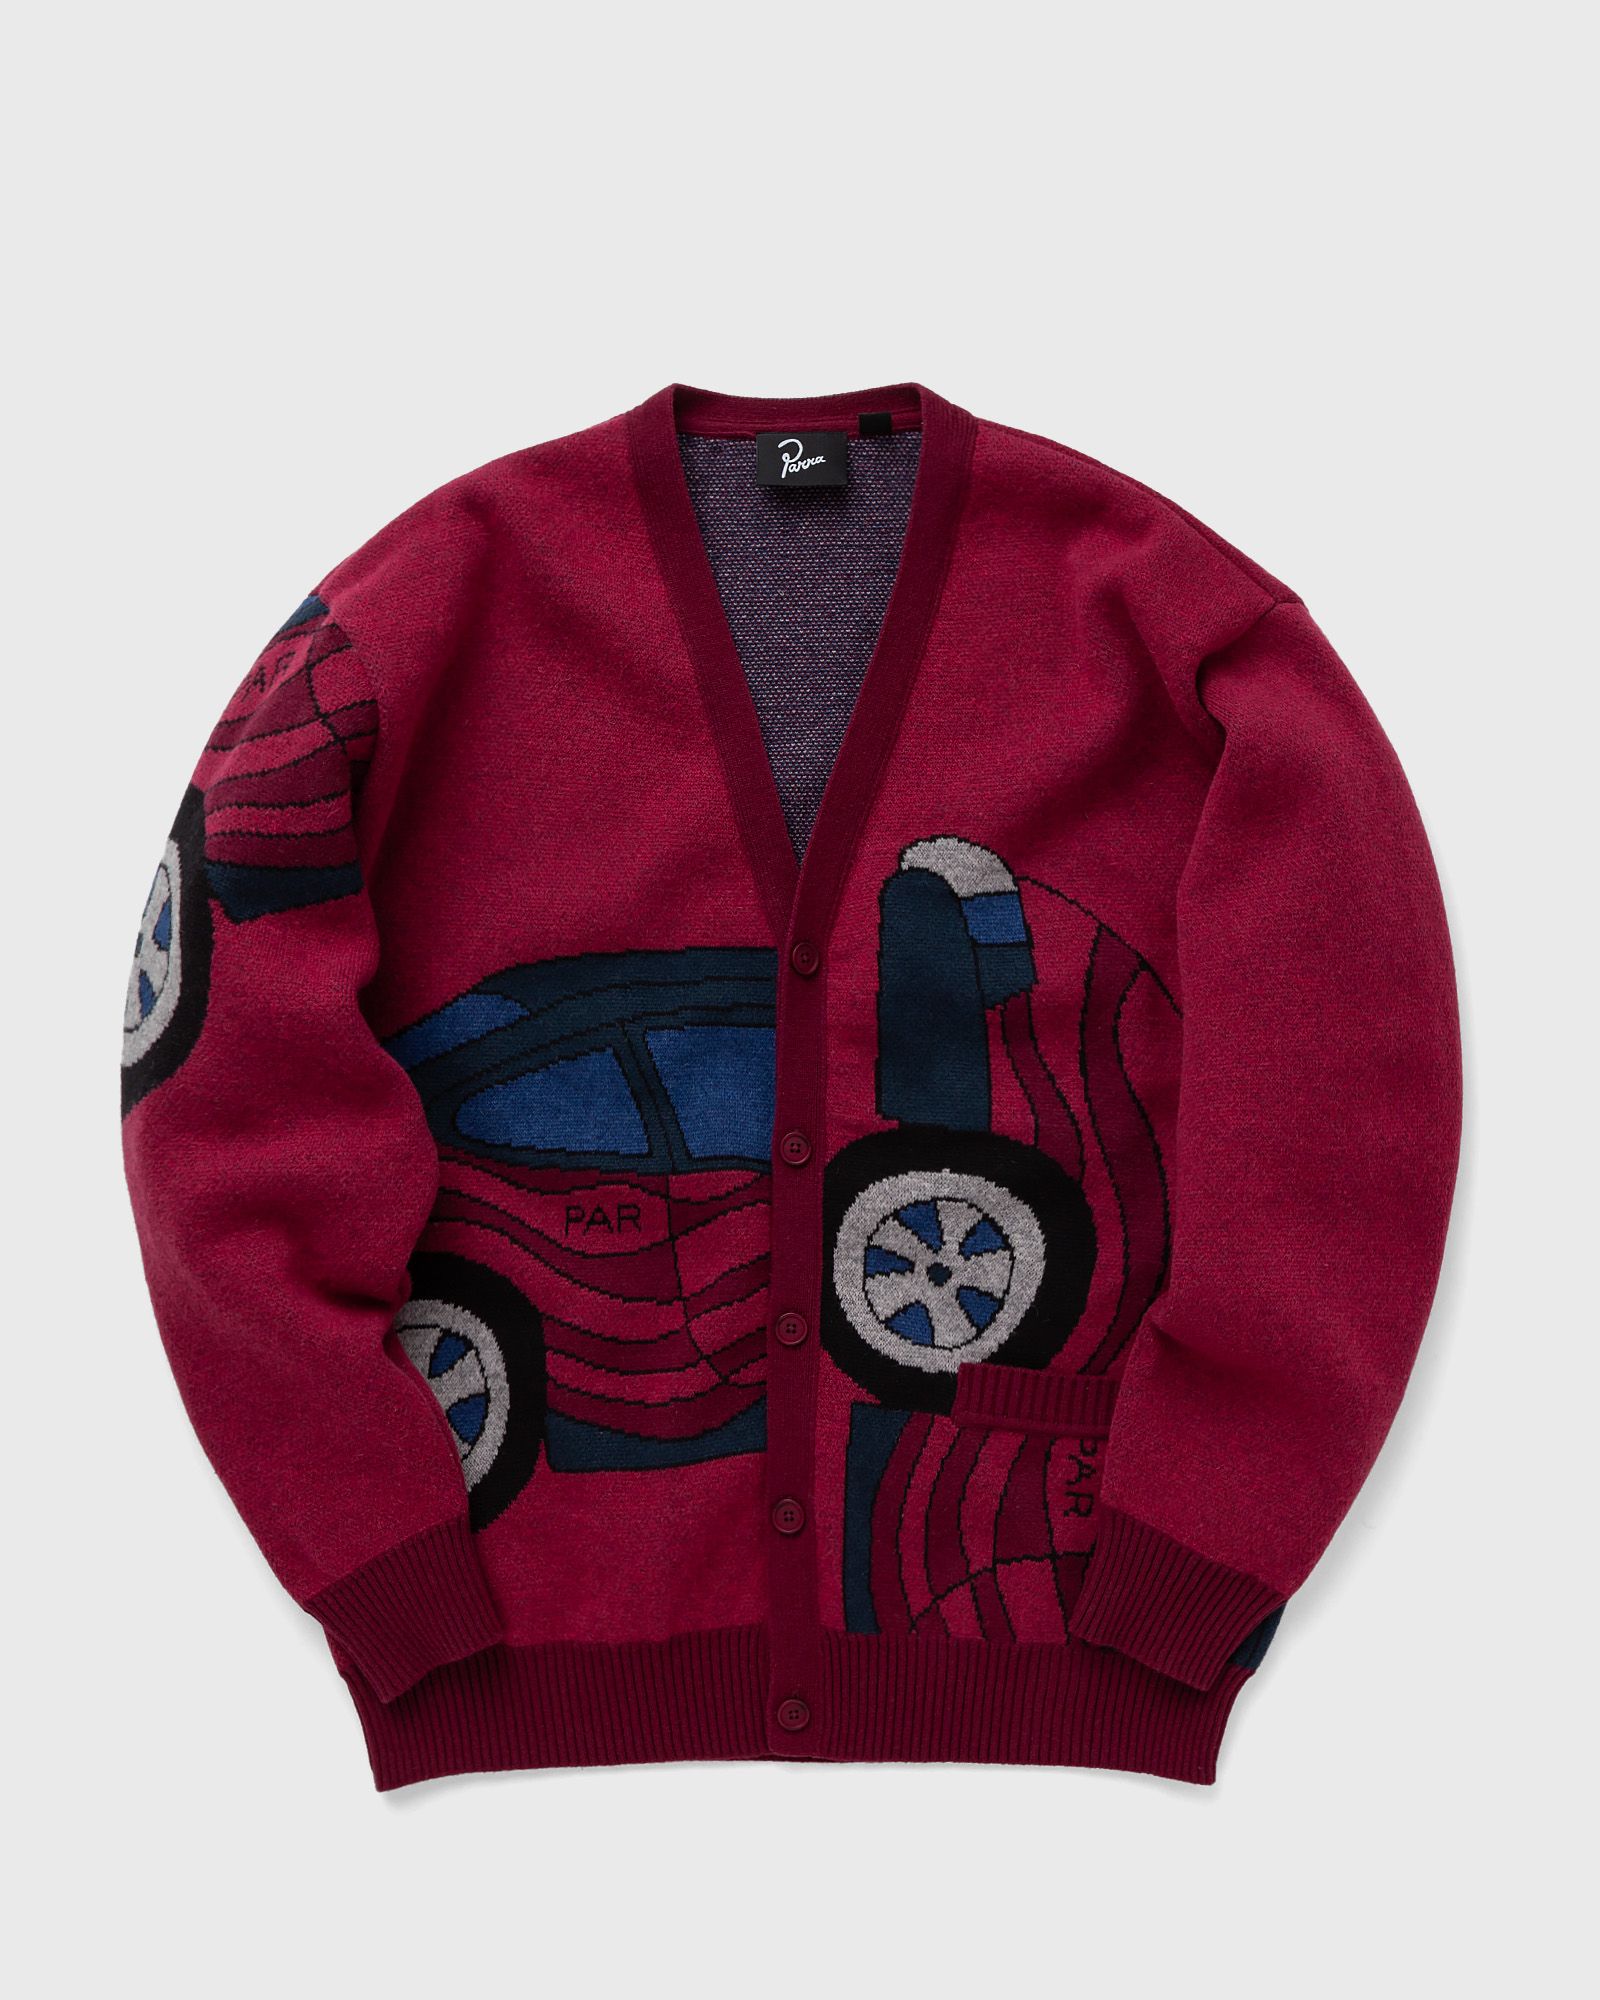 By Parra - no parking knitted cardigan men zippers & cardigans red in größe:xl